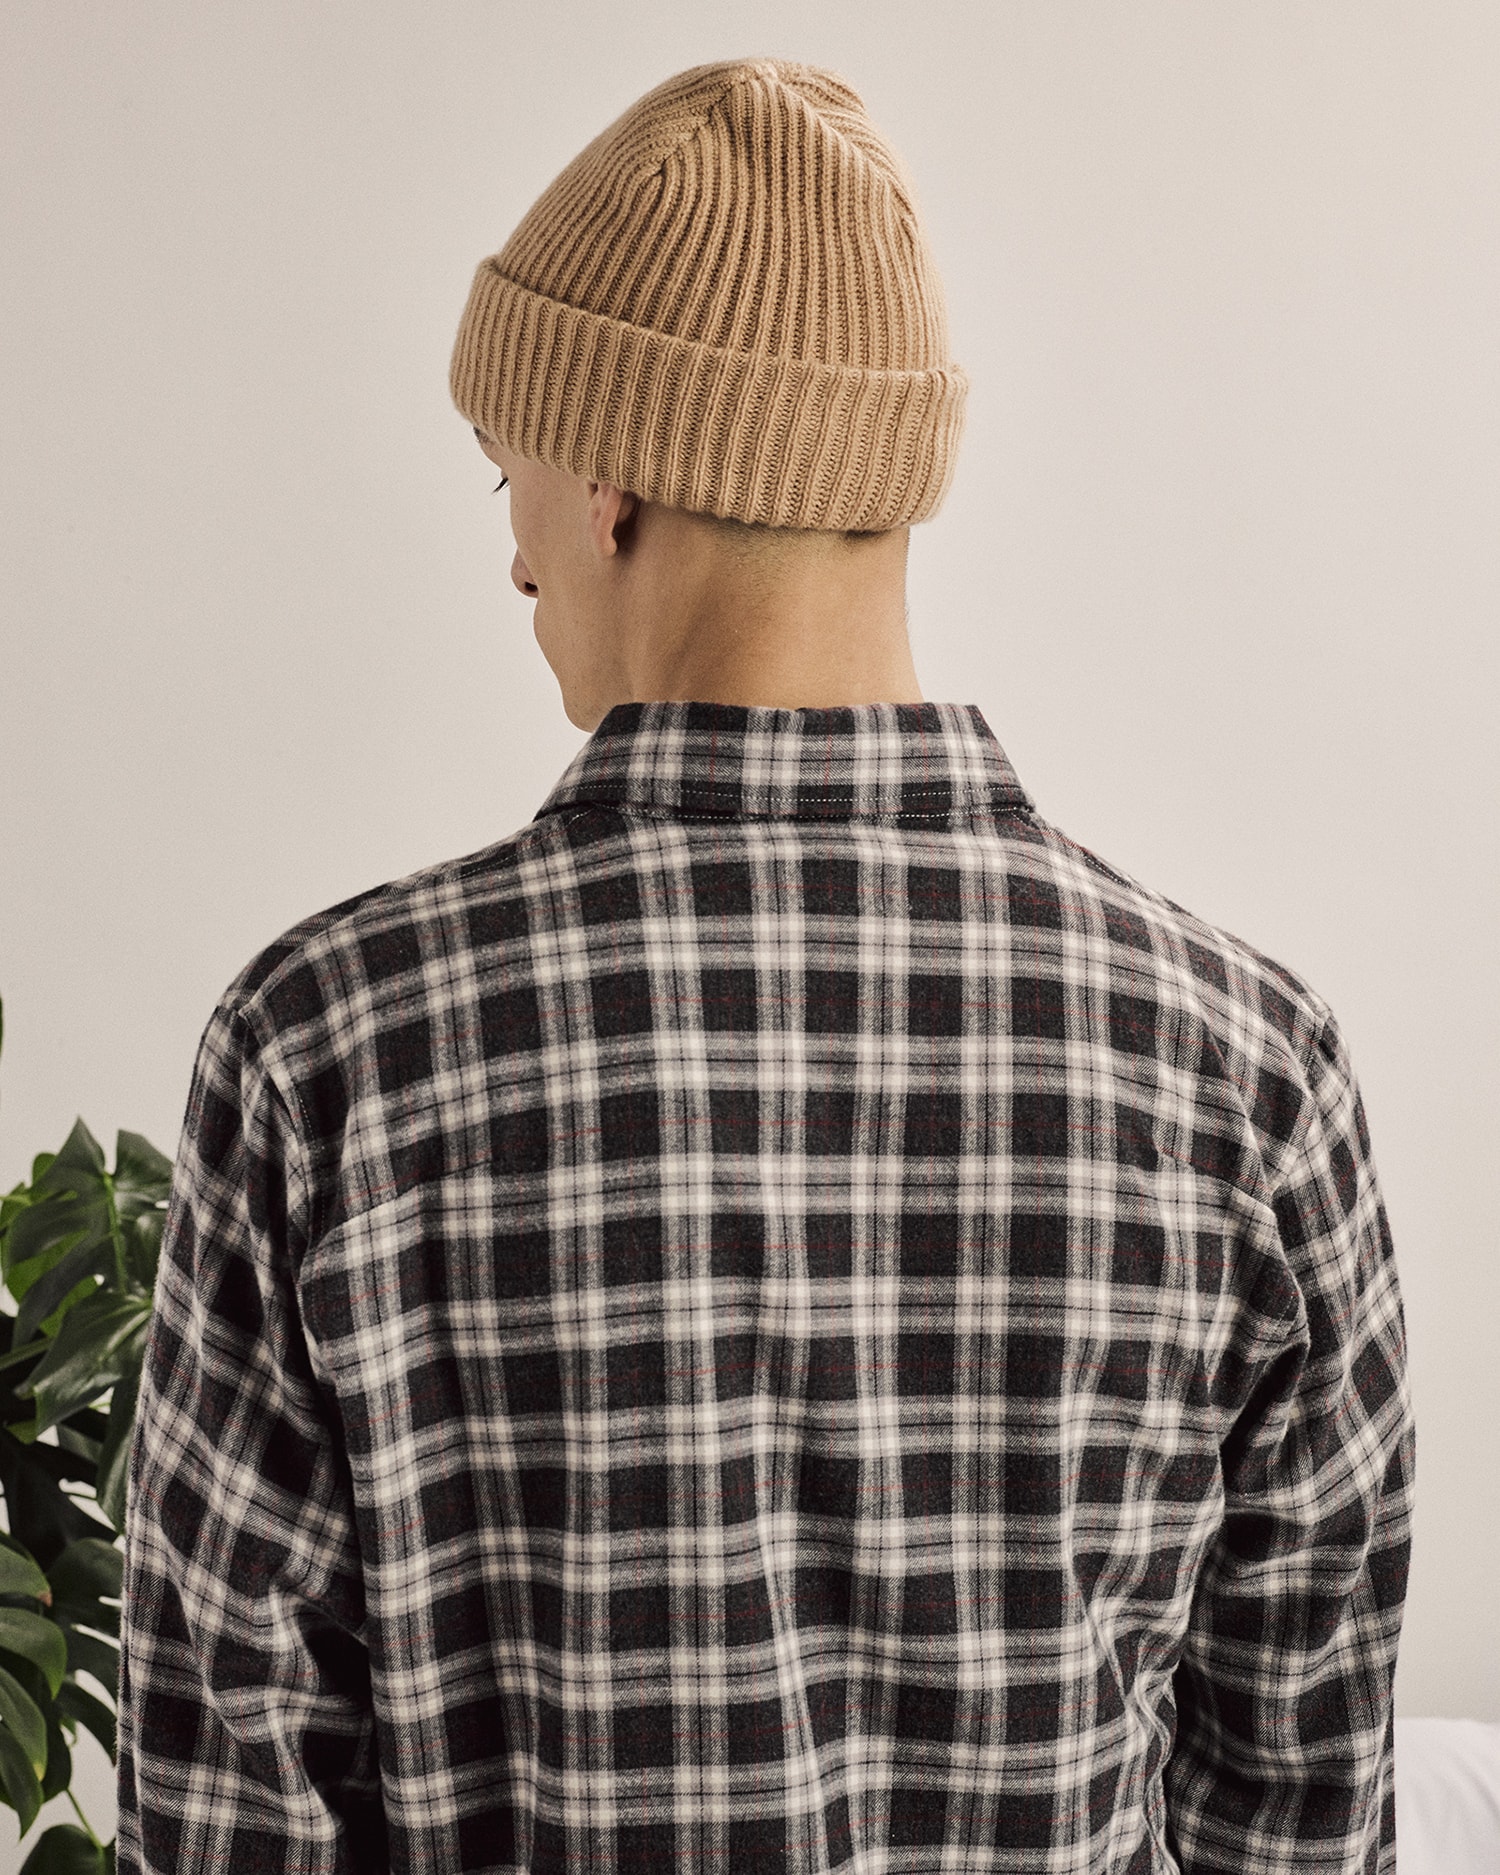 John Elliott Launches Black Friday Collection Thanksgiving Capsule Collection varsity jacket stadium plaid flannels cashmere beanie cold weather promotion menswear